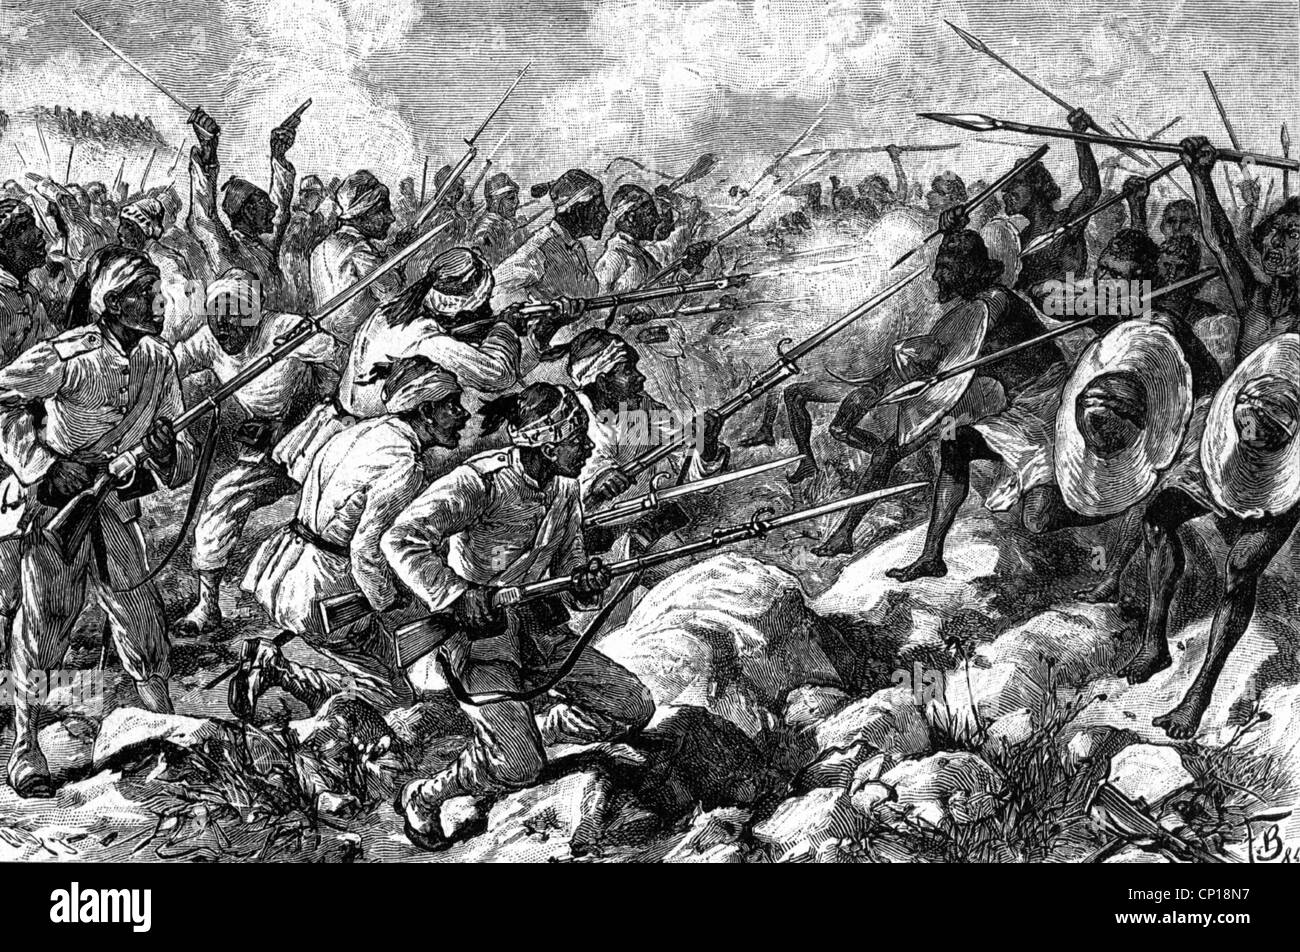 geography / travel, Sudan, Mahdist War 1881 - 1898, Egypt soldiers fighting with rebels, after drawing by Fritz Berger, wood engraving, 1884, 1880s, 19th century, historic, historical, campaign, campaigns, , soldiers, military, colonial, colonialism, war, insurgent, insurgents, rebel, rebels, revolter, revolters, revolution, revolt, insurgency, revolts, rebellion, national uprising, national uprisings, riot, riots, battlefield, Northern Africa, Sudanese, people, Additional-Rights-Clearences-Not Available Stock Photo